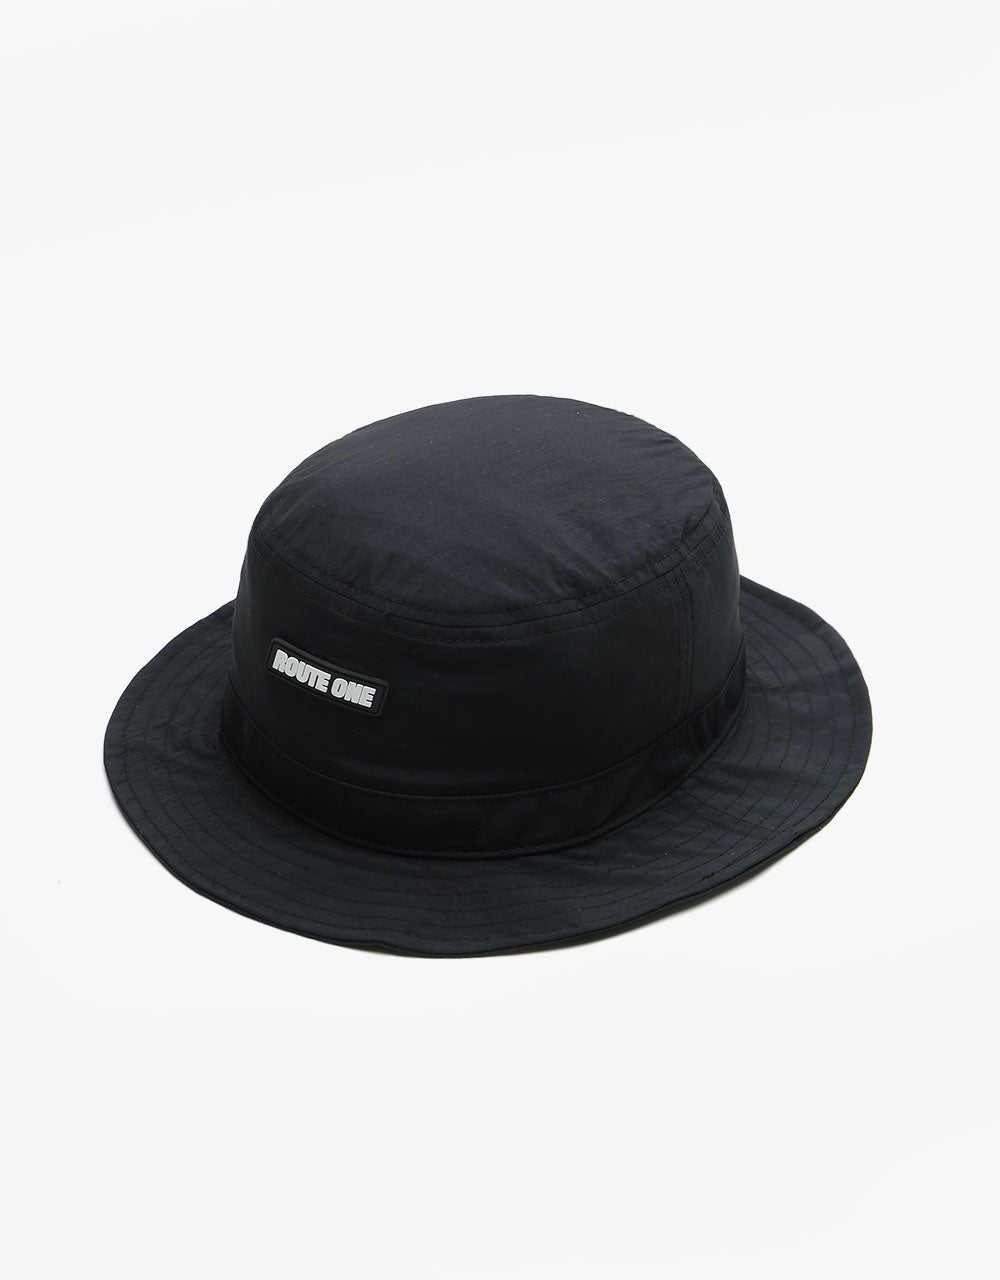 Route One Athletic Bucket Hat - Black